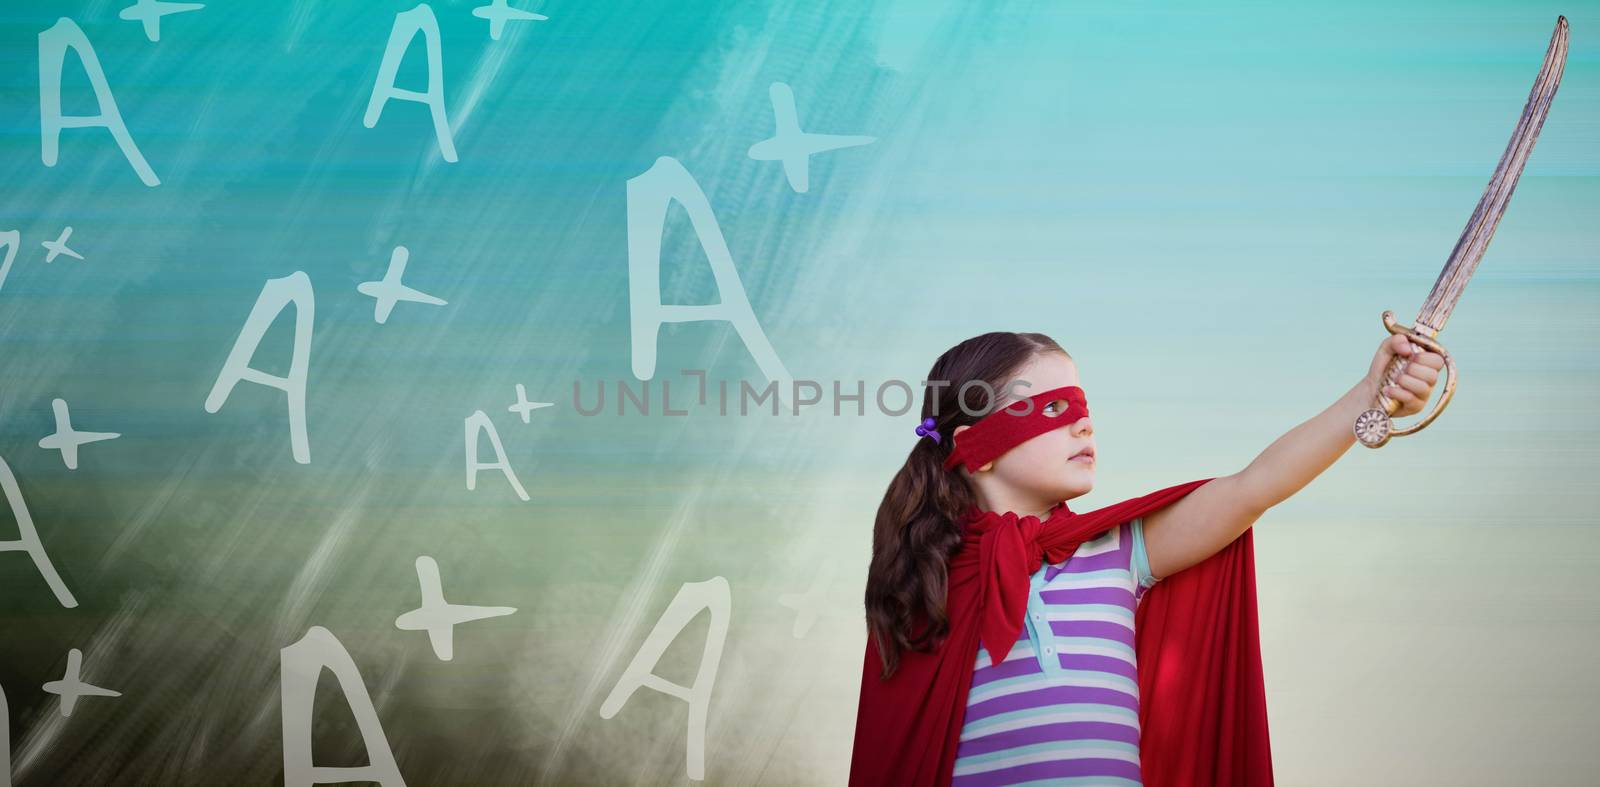 Girl in superhero costume holding artificial sword against turquoise abstract backgrounds